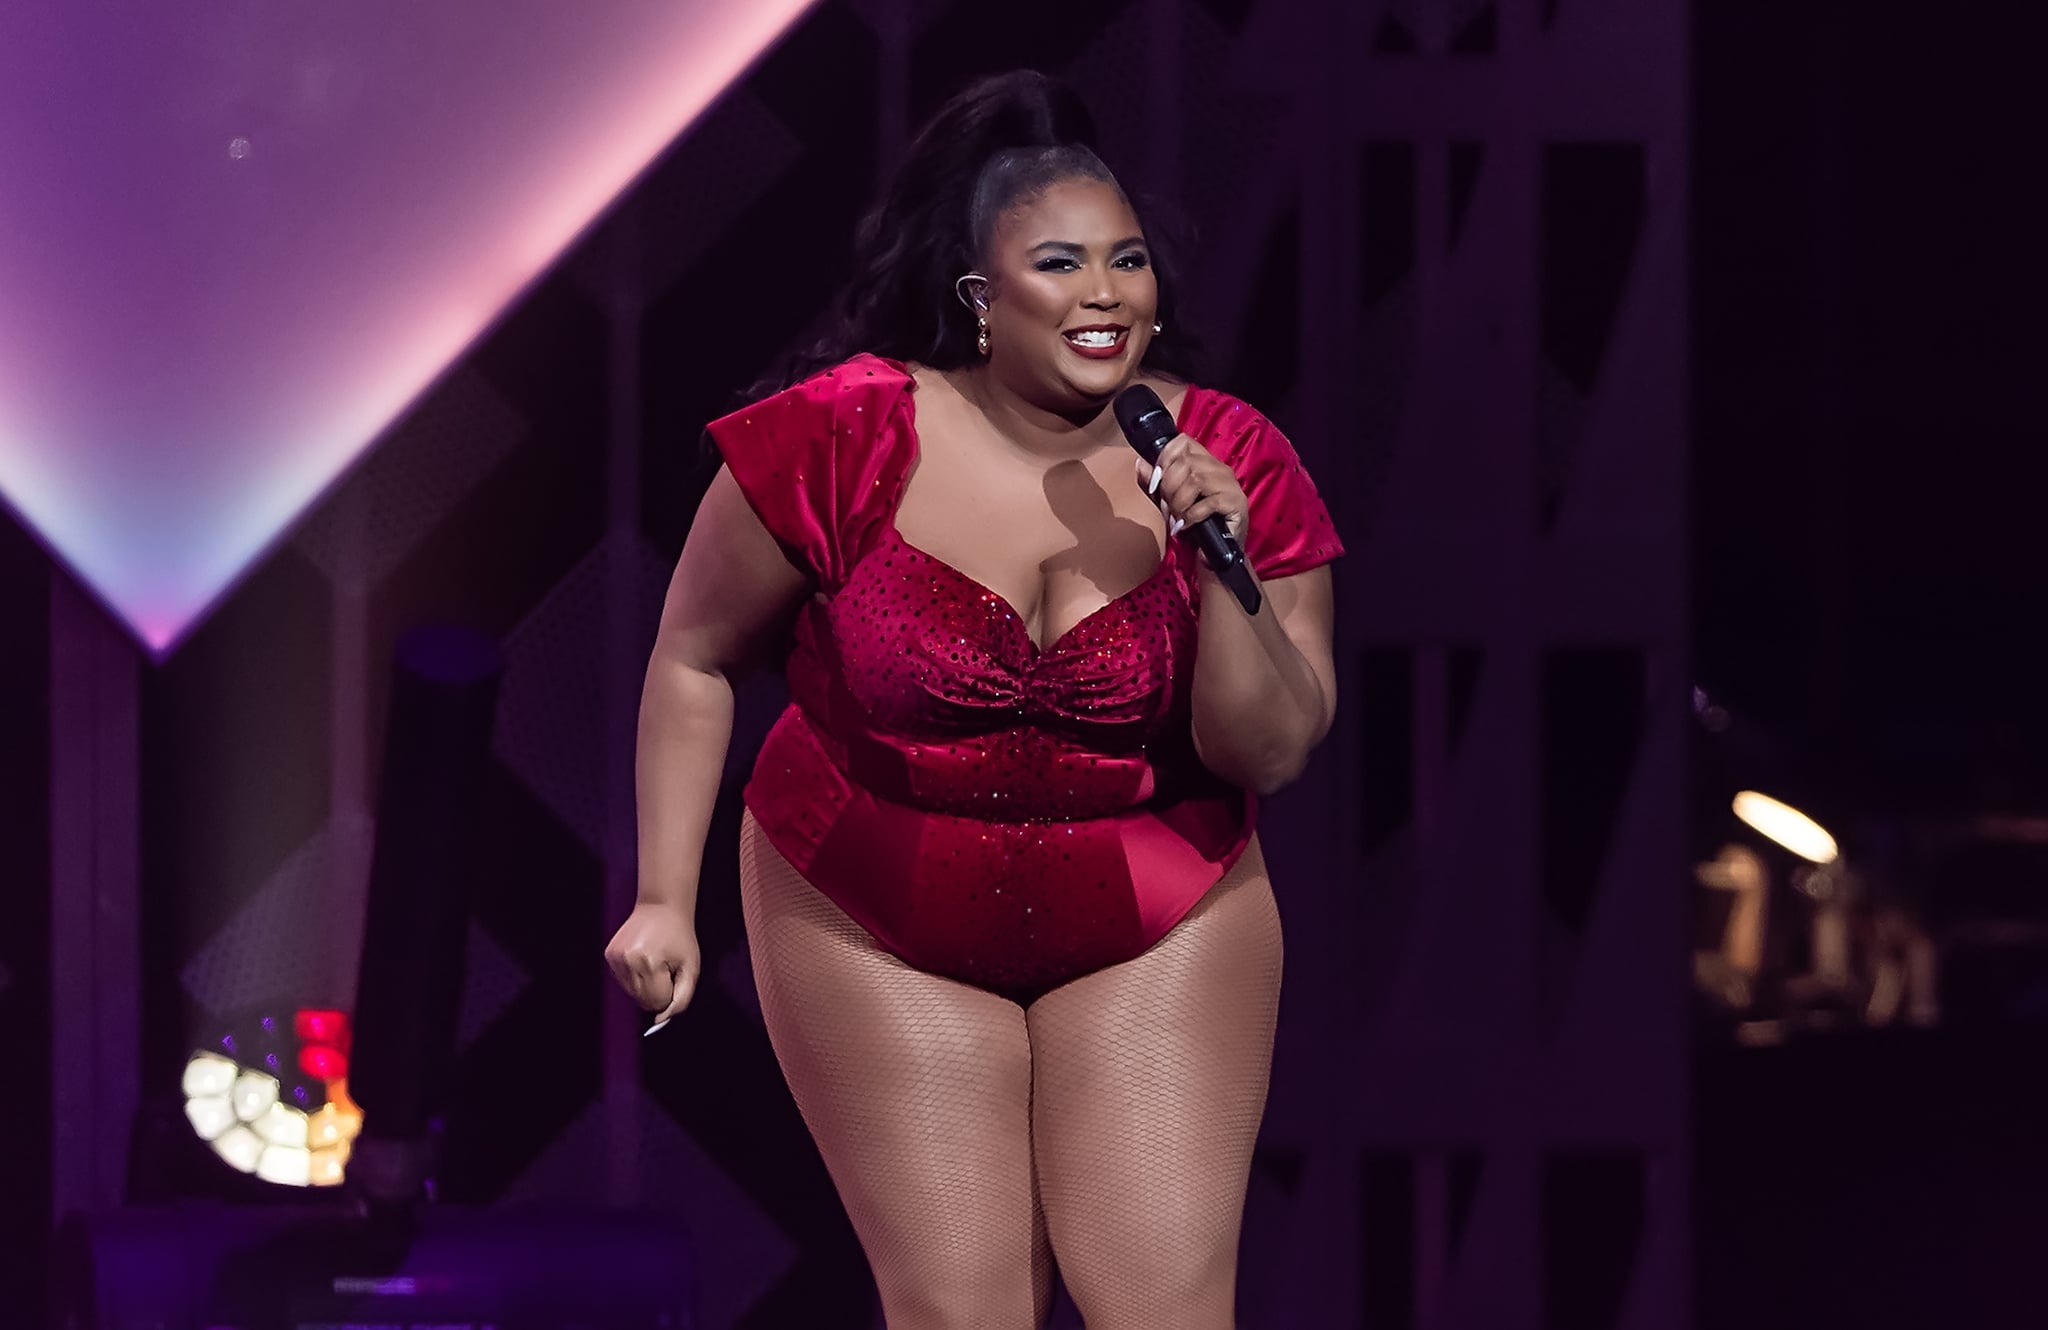 PHILADELPHIA, PENNSYLVANIA - DECEMBER 11: Singer Lizzo performs on stage during Q102's iHeartRadio Jingle Ball 2019 at Wells Fargo Center on December 11, 2019 in Philadelphia, Pennsylvania. (Photo by Gilbert Carrasquillo/Getty Images)